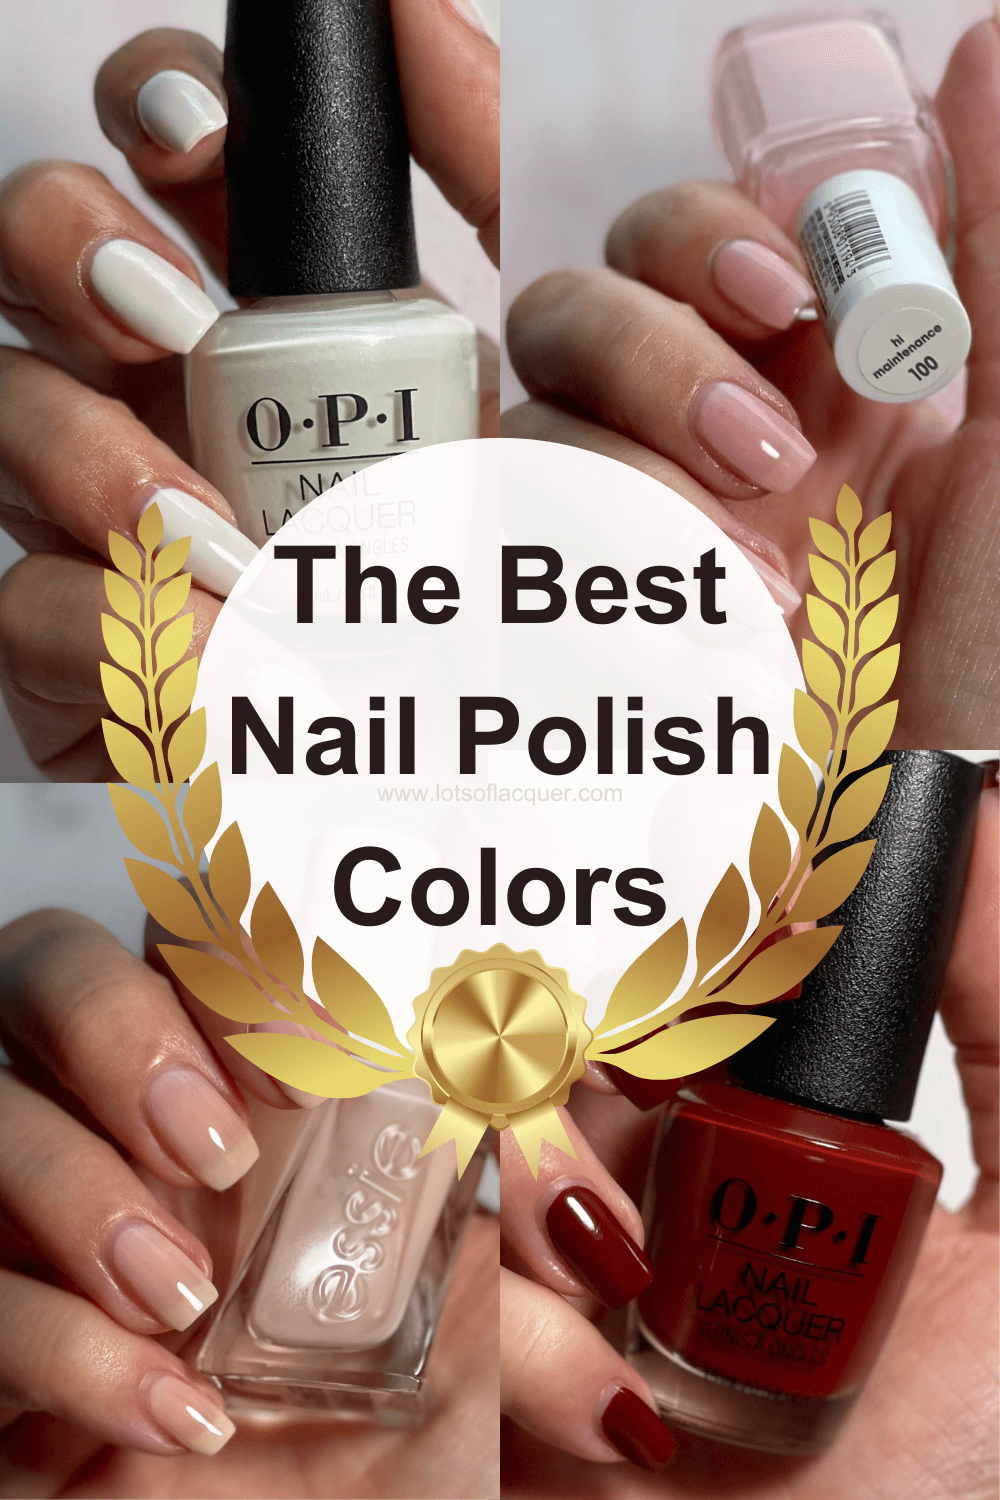 100+ GORGEOUS Summer Nails For Your Next Manicure | Nail colors, Summer nails  colors, Gorgeous nails